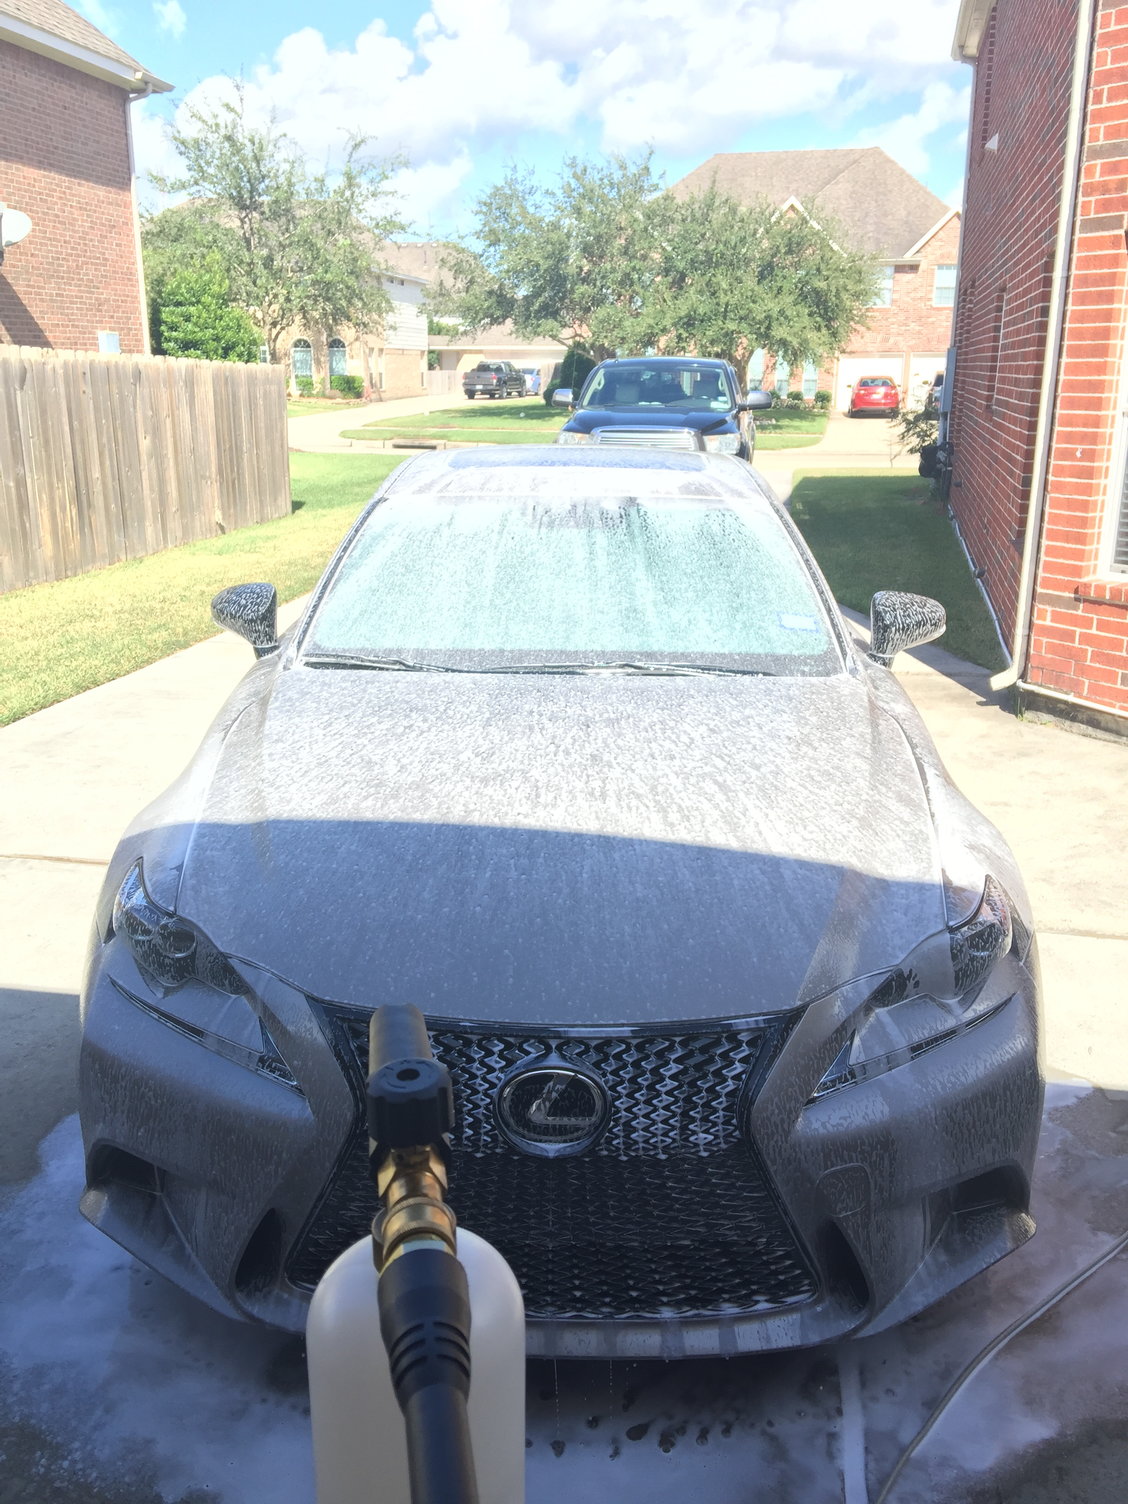 Wrapped IS350 F-Sport- Klycambo - ClubLexus - Lexus Forum Discussion